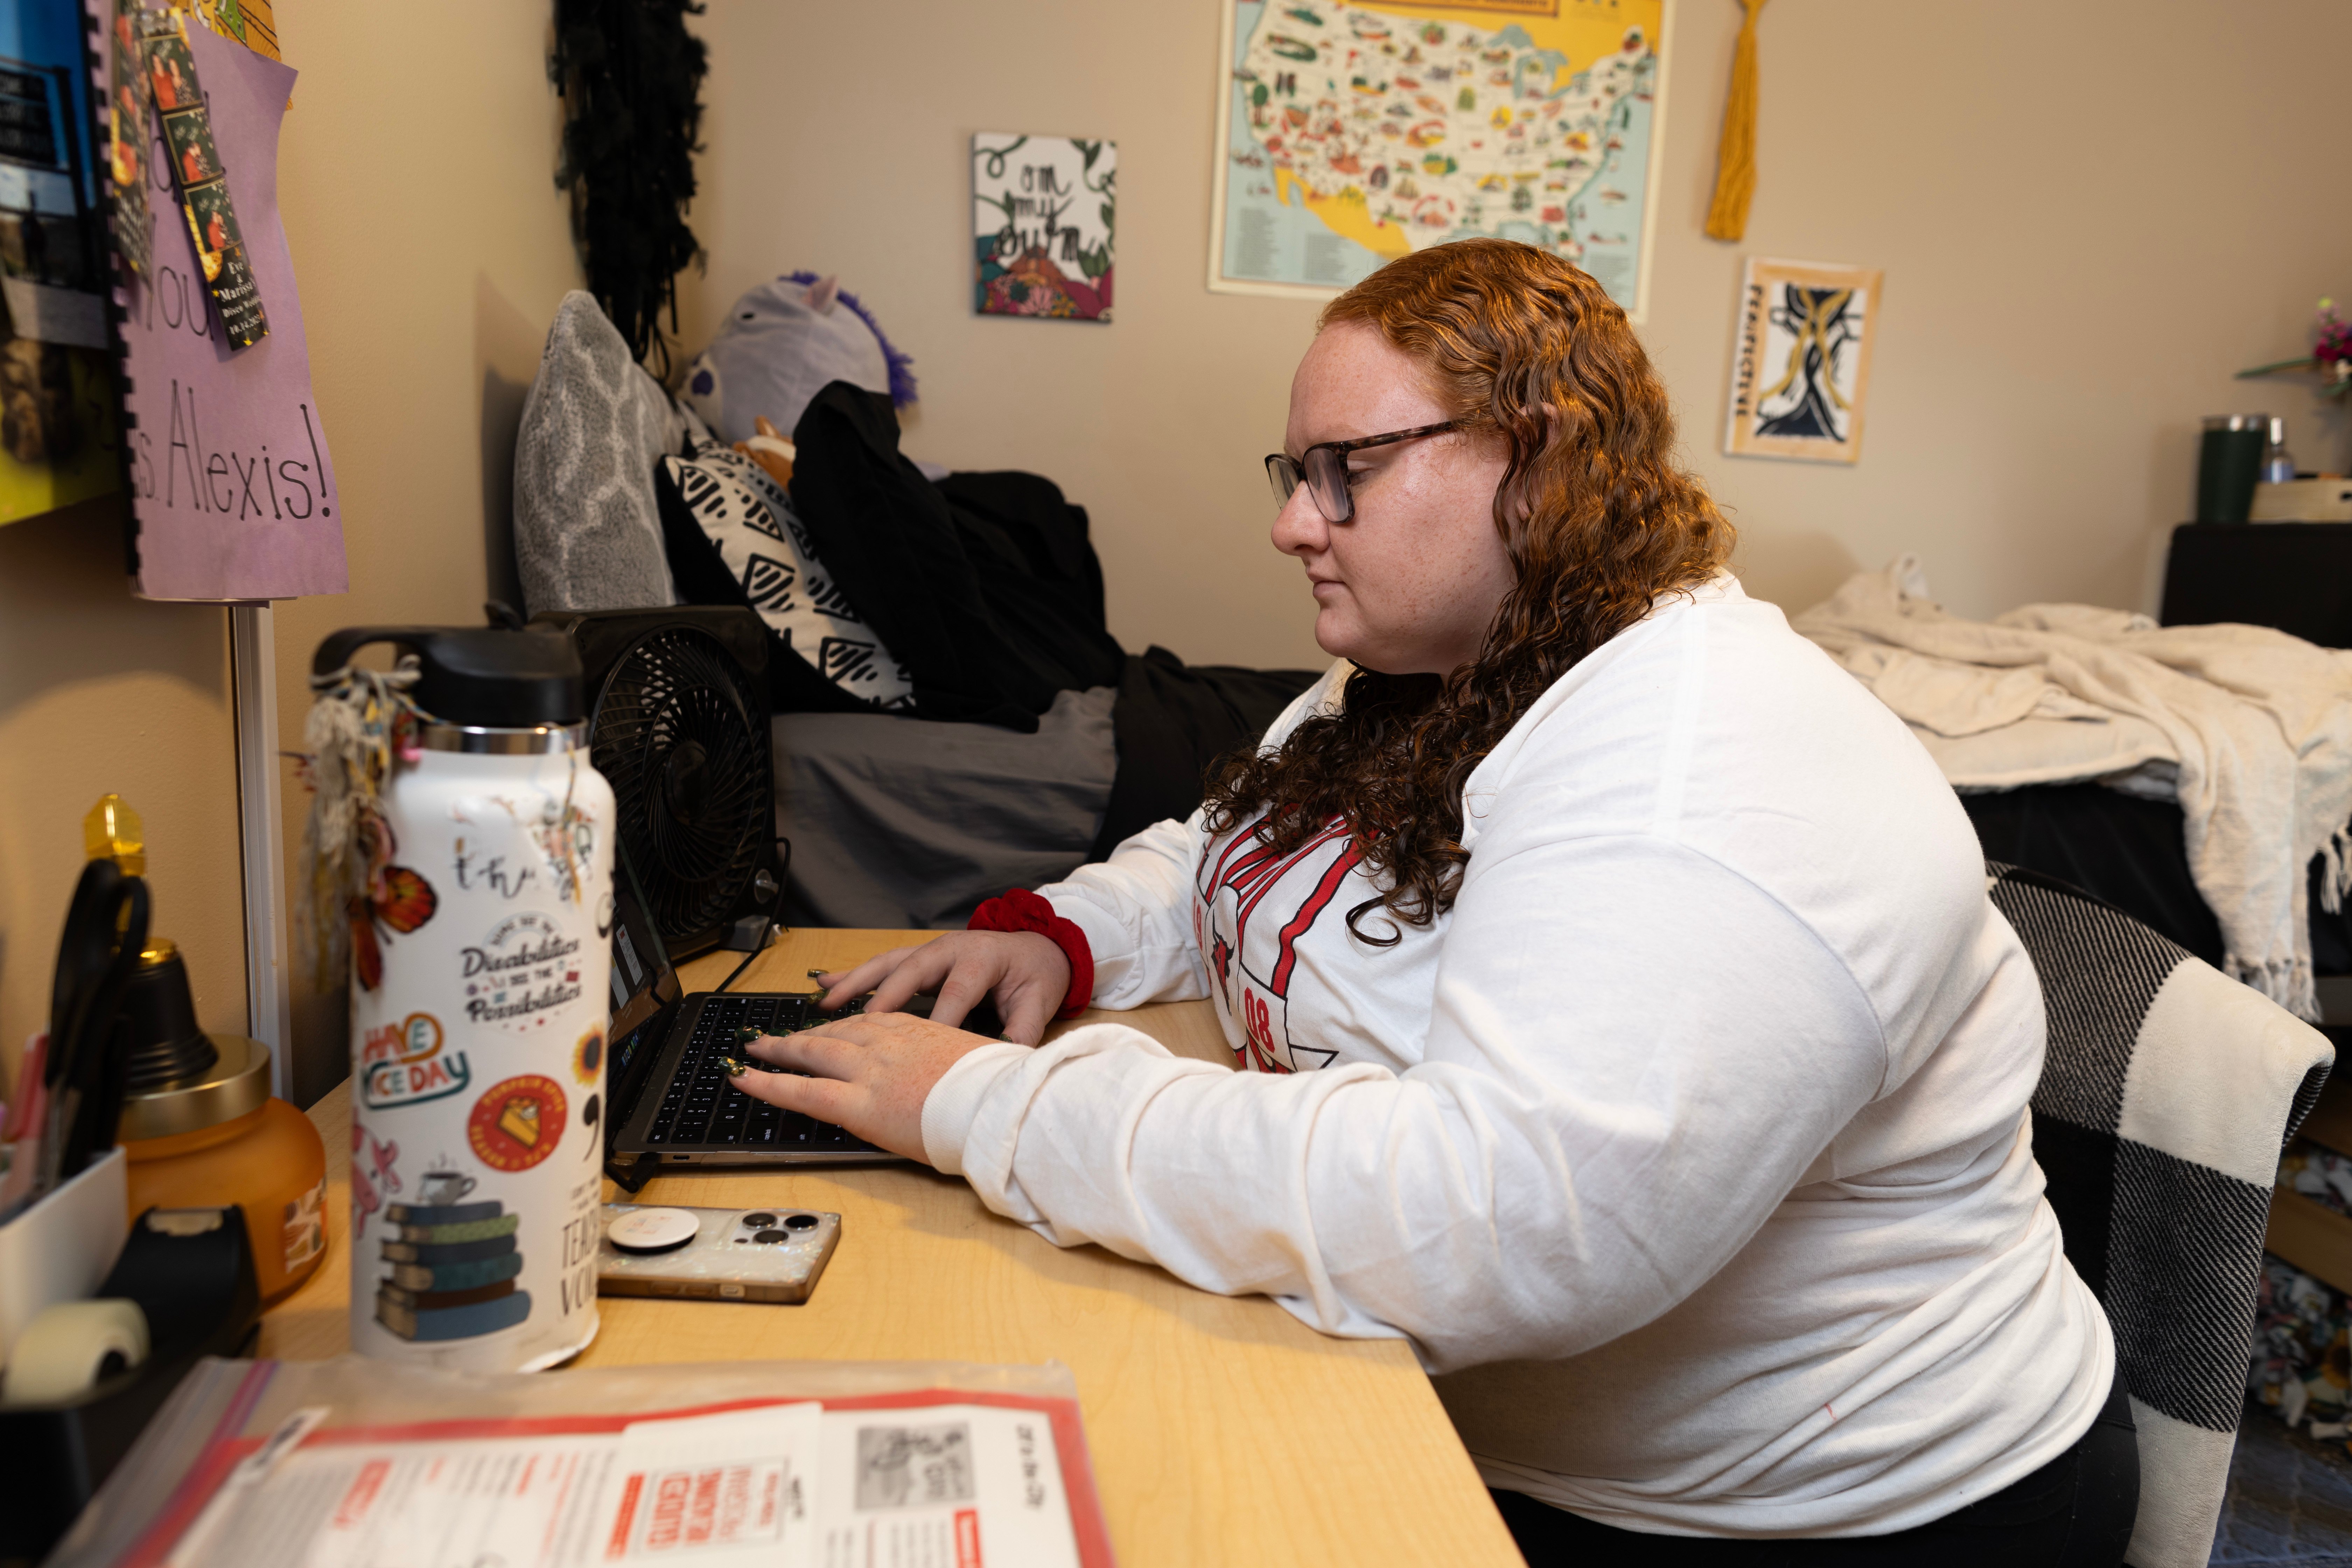 Alexis Saxton doing homework at a desk in her dorm room.